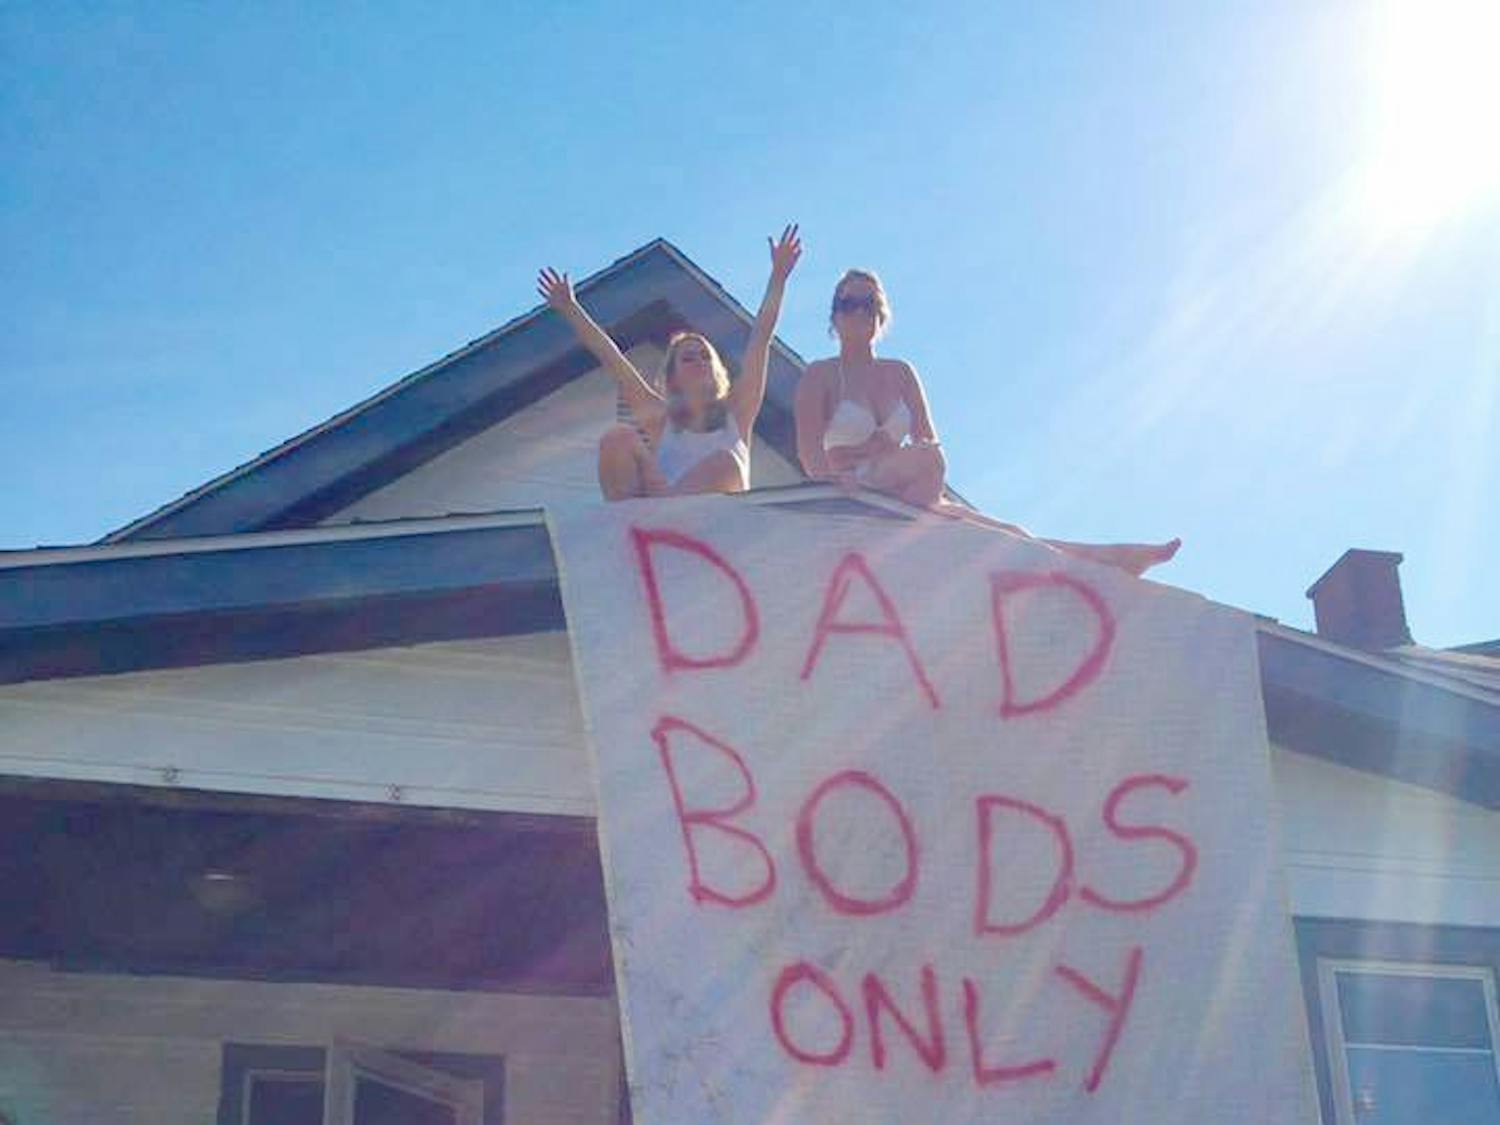 Dad bods, the new trend of being adorably unfit, have taken over college campuses. Women are drooling over men with bellies while men proudly show of their lack of fitness.